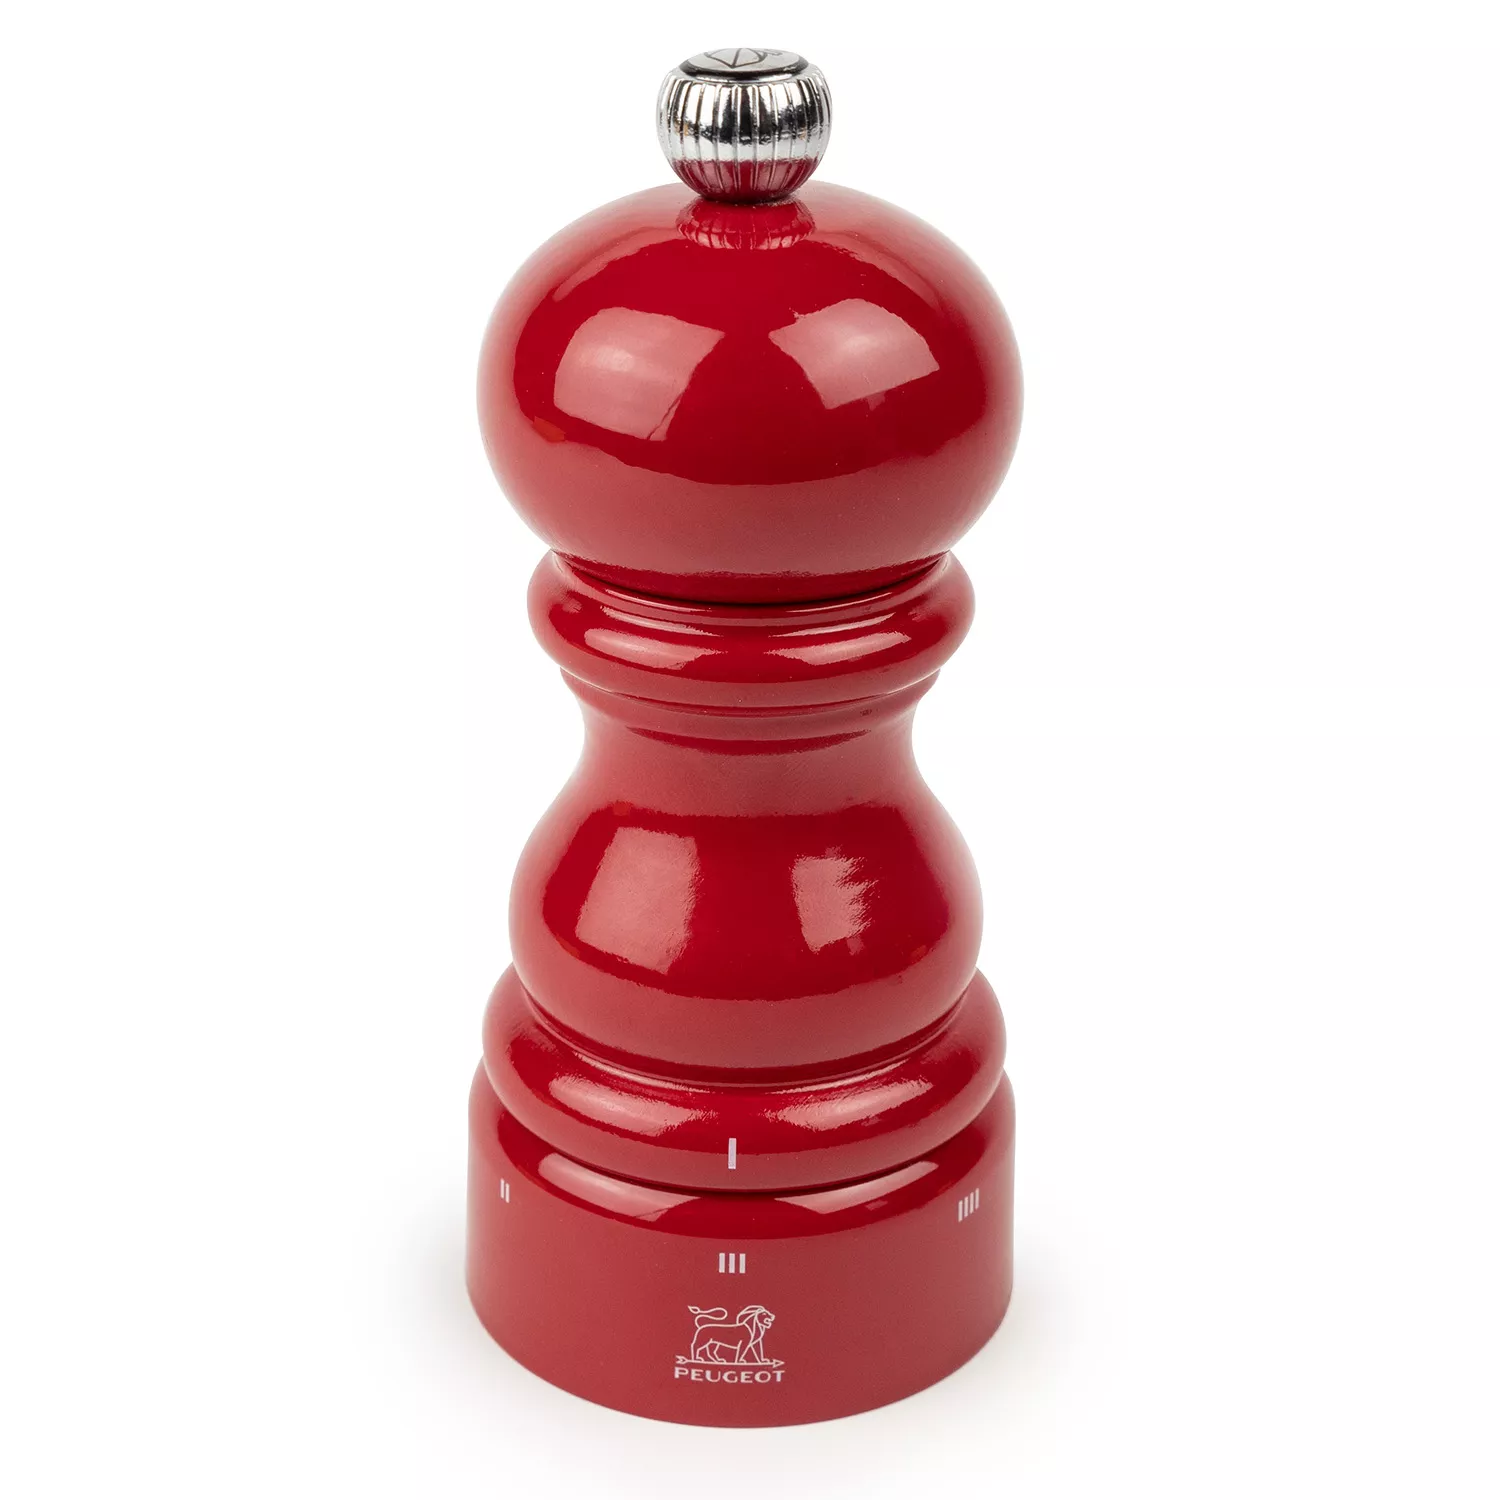 Peugeot Paris salt and pepper mills. So much better than those